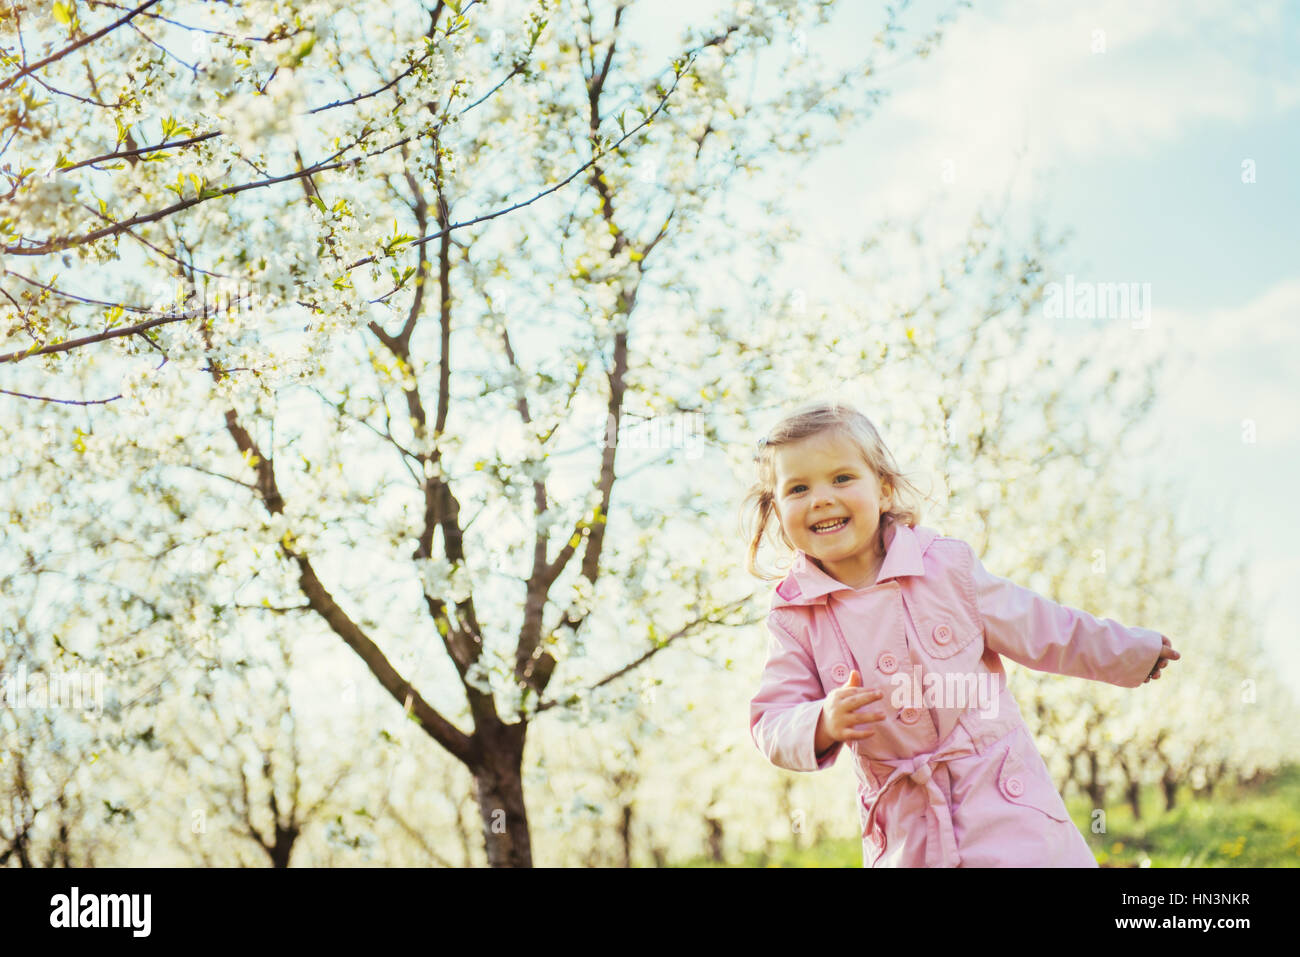 child running outdoors blossom trees. Art processing and retouch Stock Photo